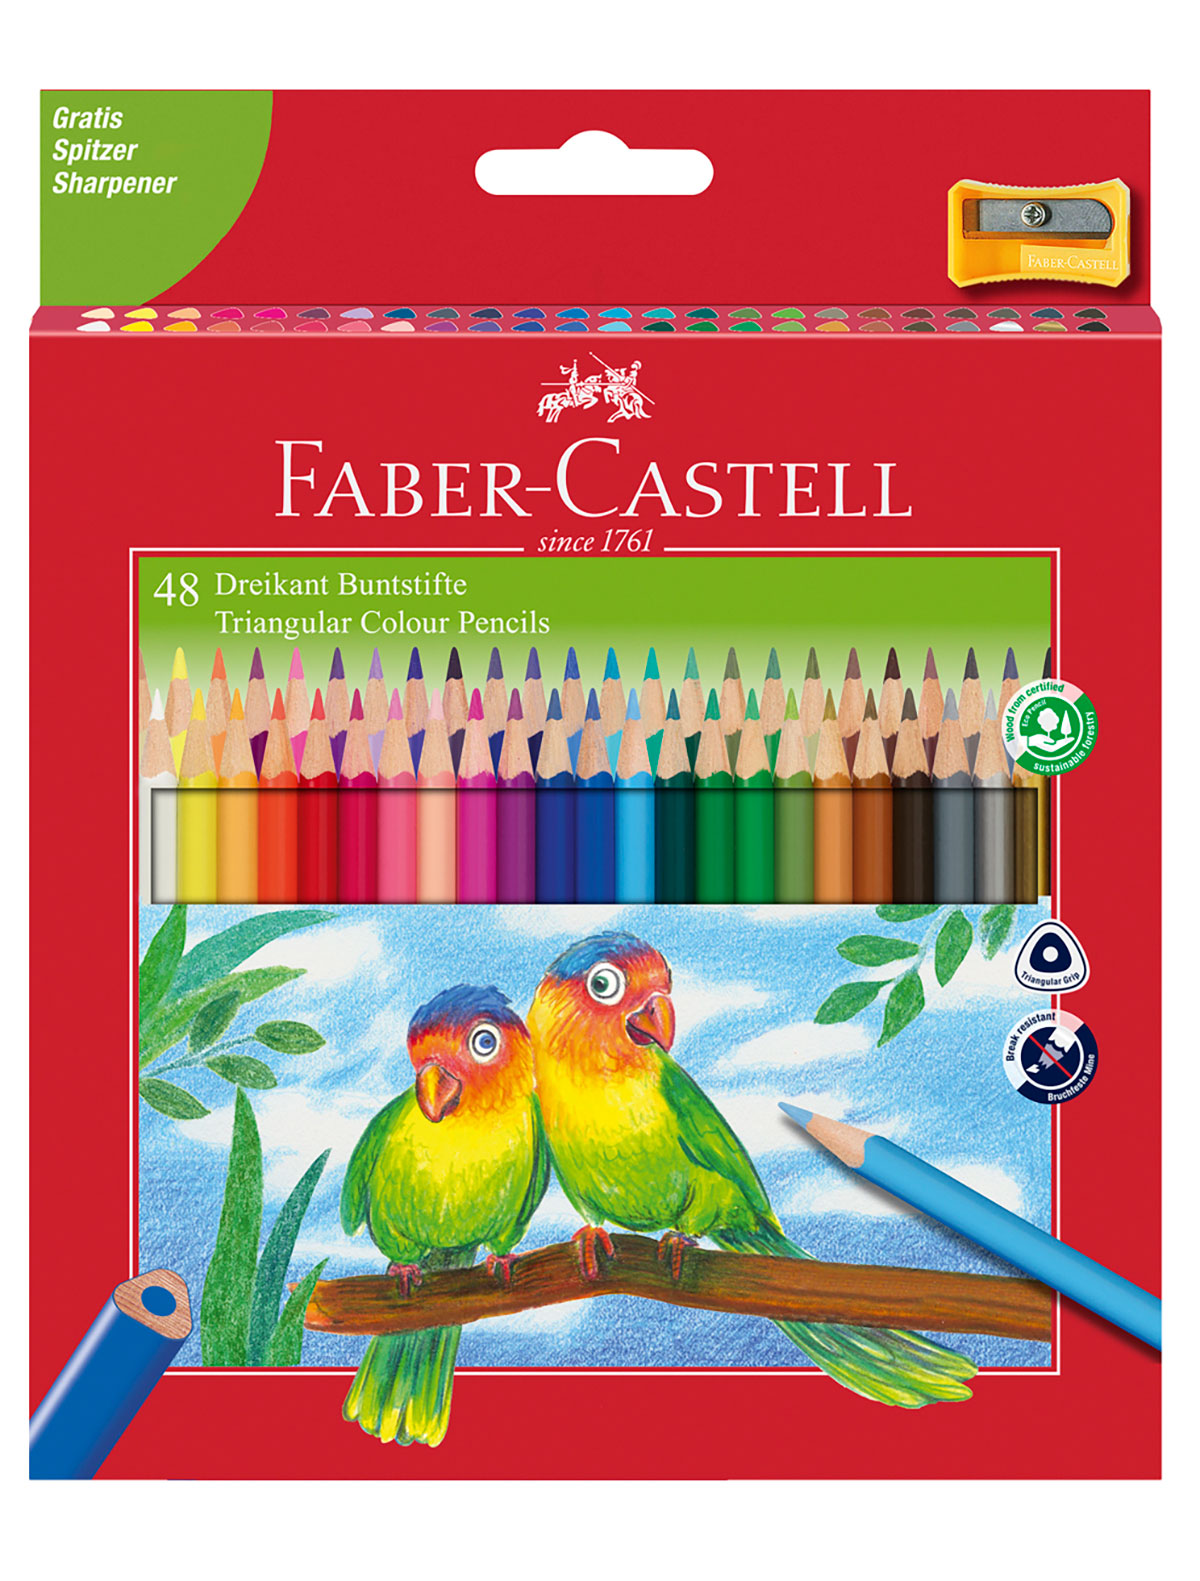 Карандаш Faber-Castell faber castell paint pencil cardboard box 24 colors full size